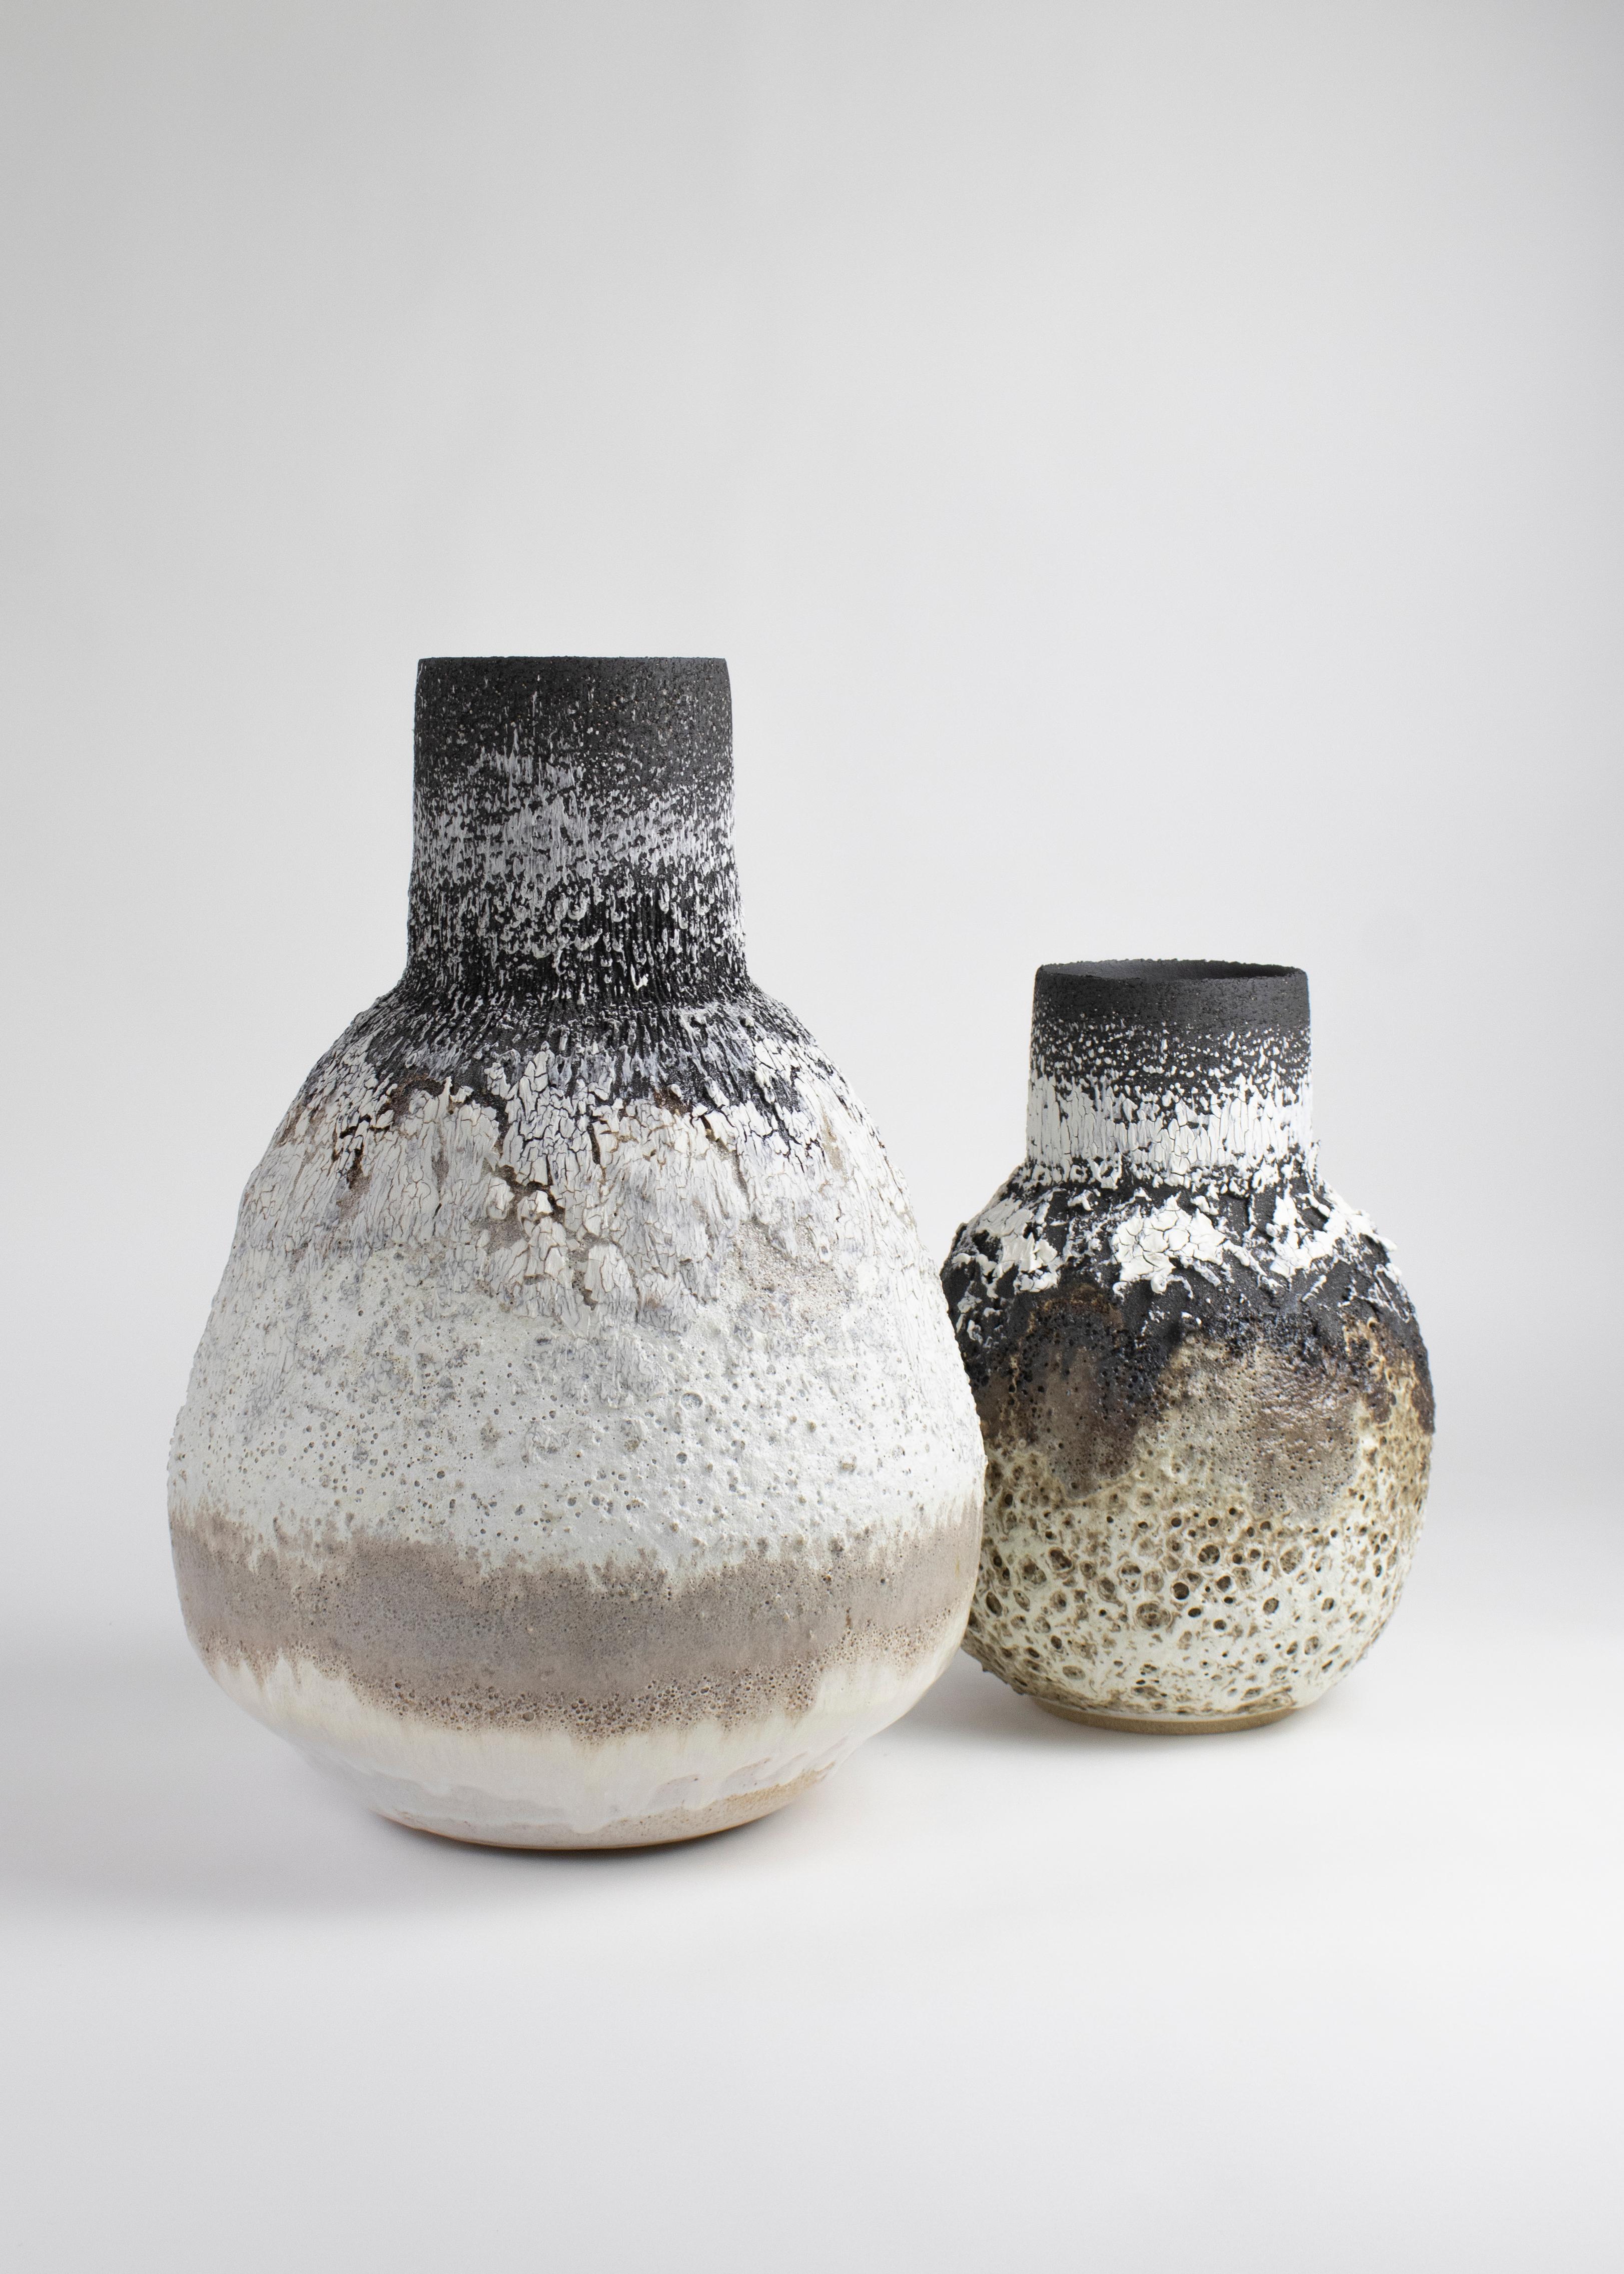 Black, White & Mocha Large Heavily Textured Stoneware, Porcelain Volcanic Vessel In New Condition For Sale In London, GB